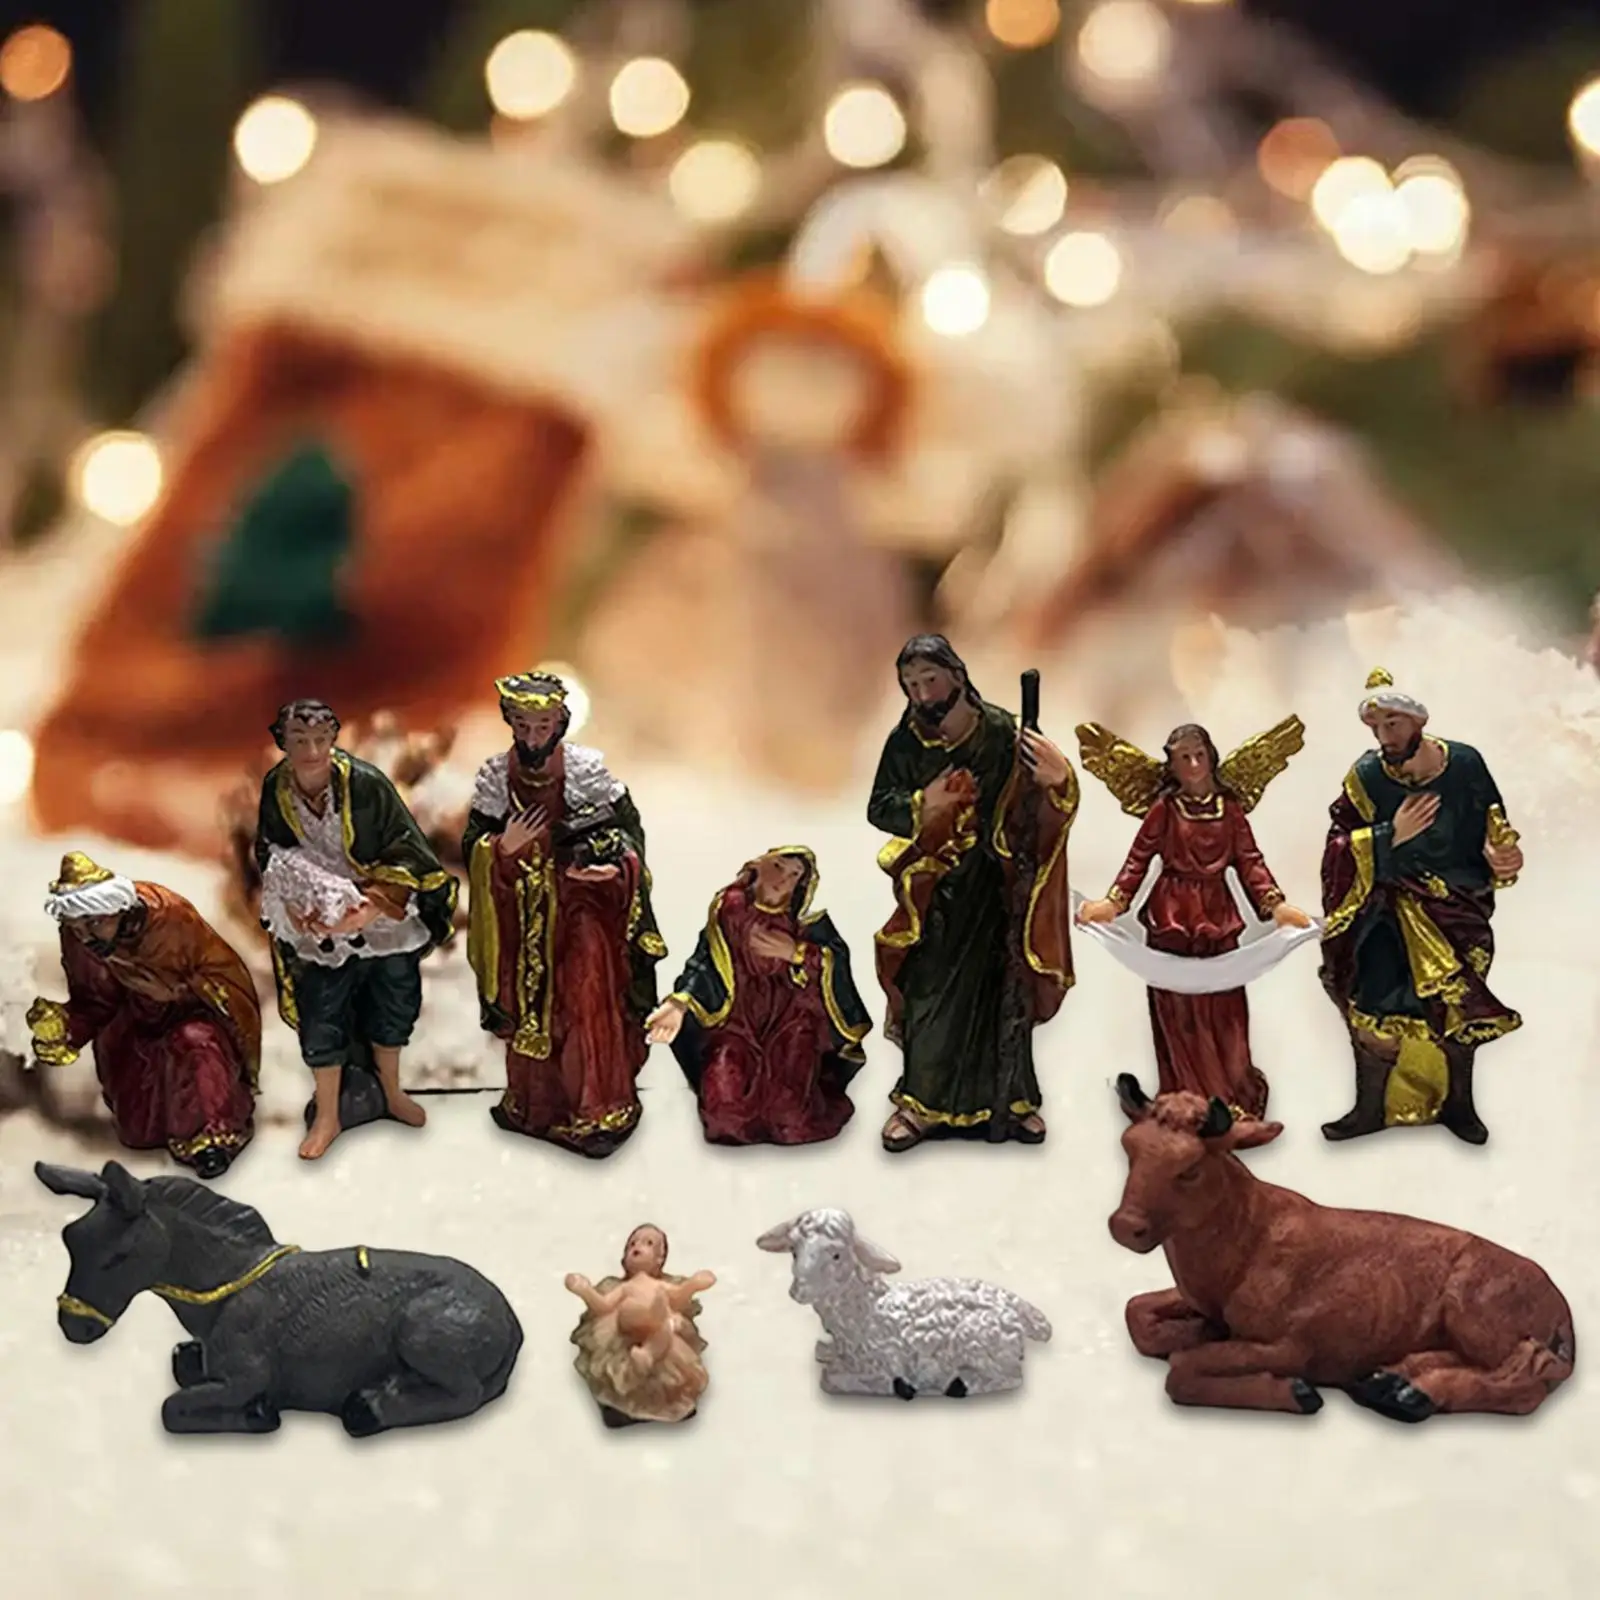 11 Pieces Nativity Scene Figures Xmas Vintage Style Collection Christmas